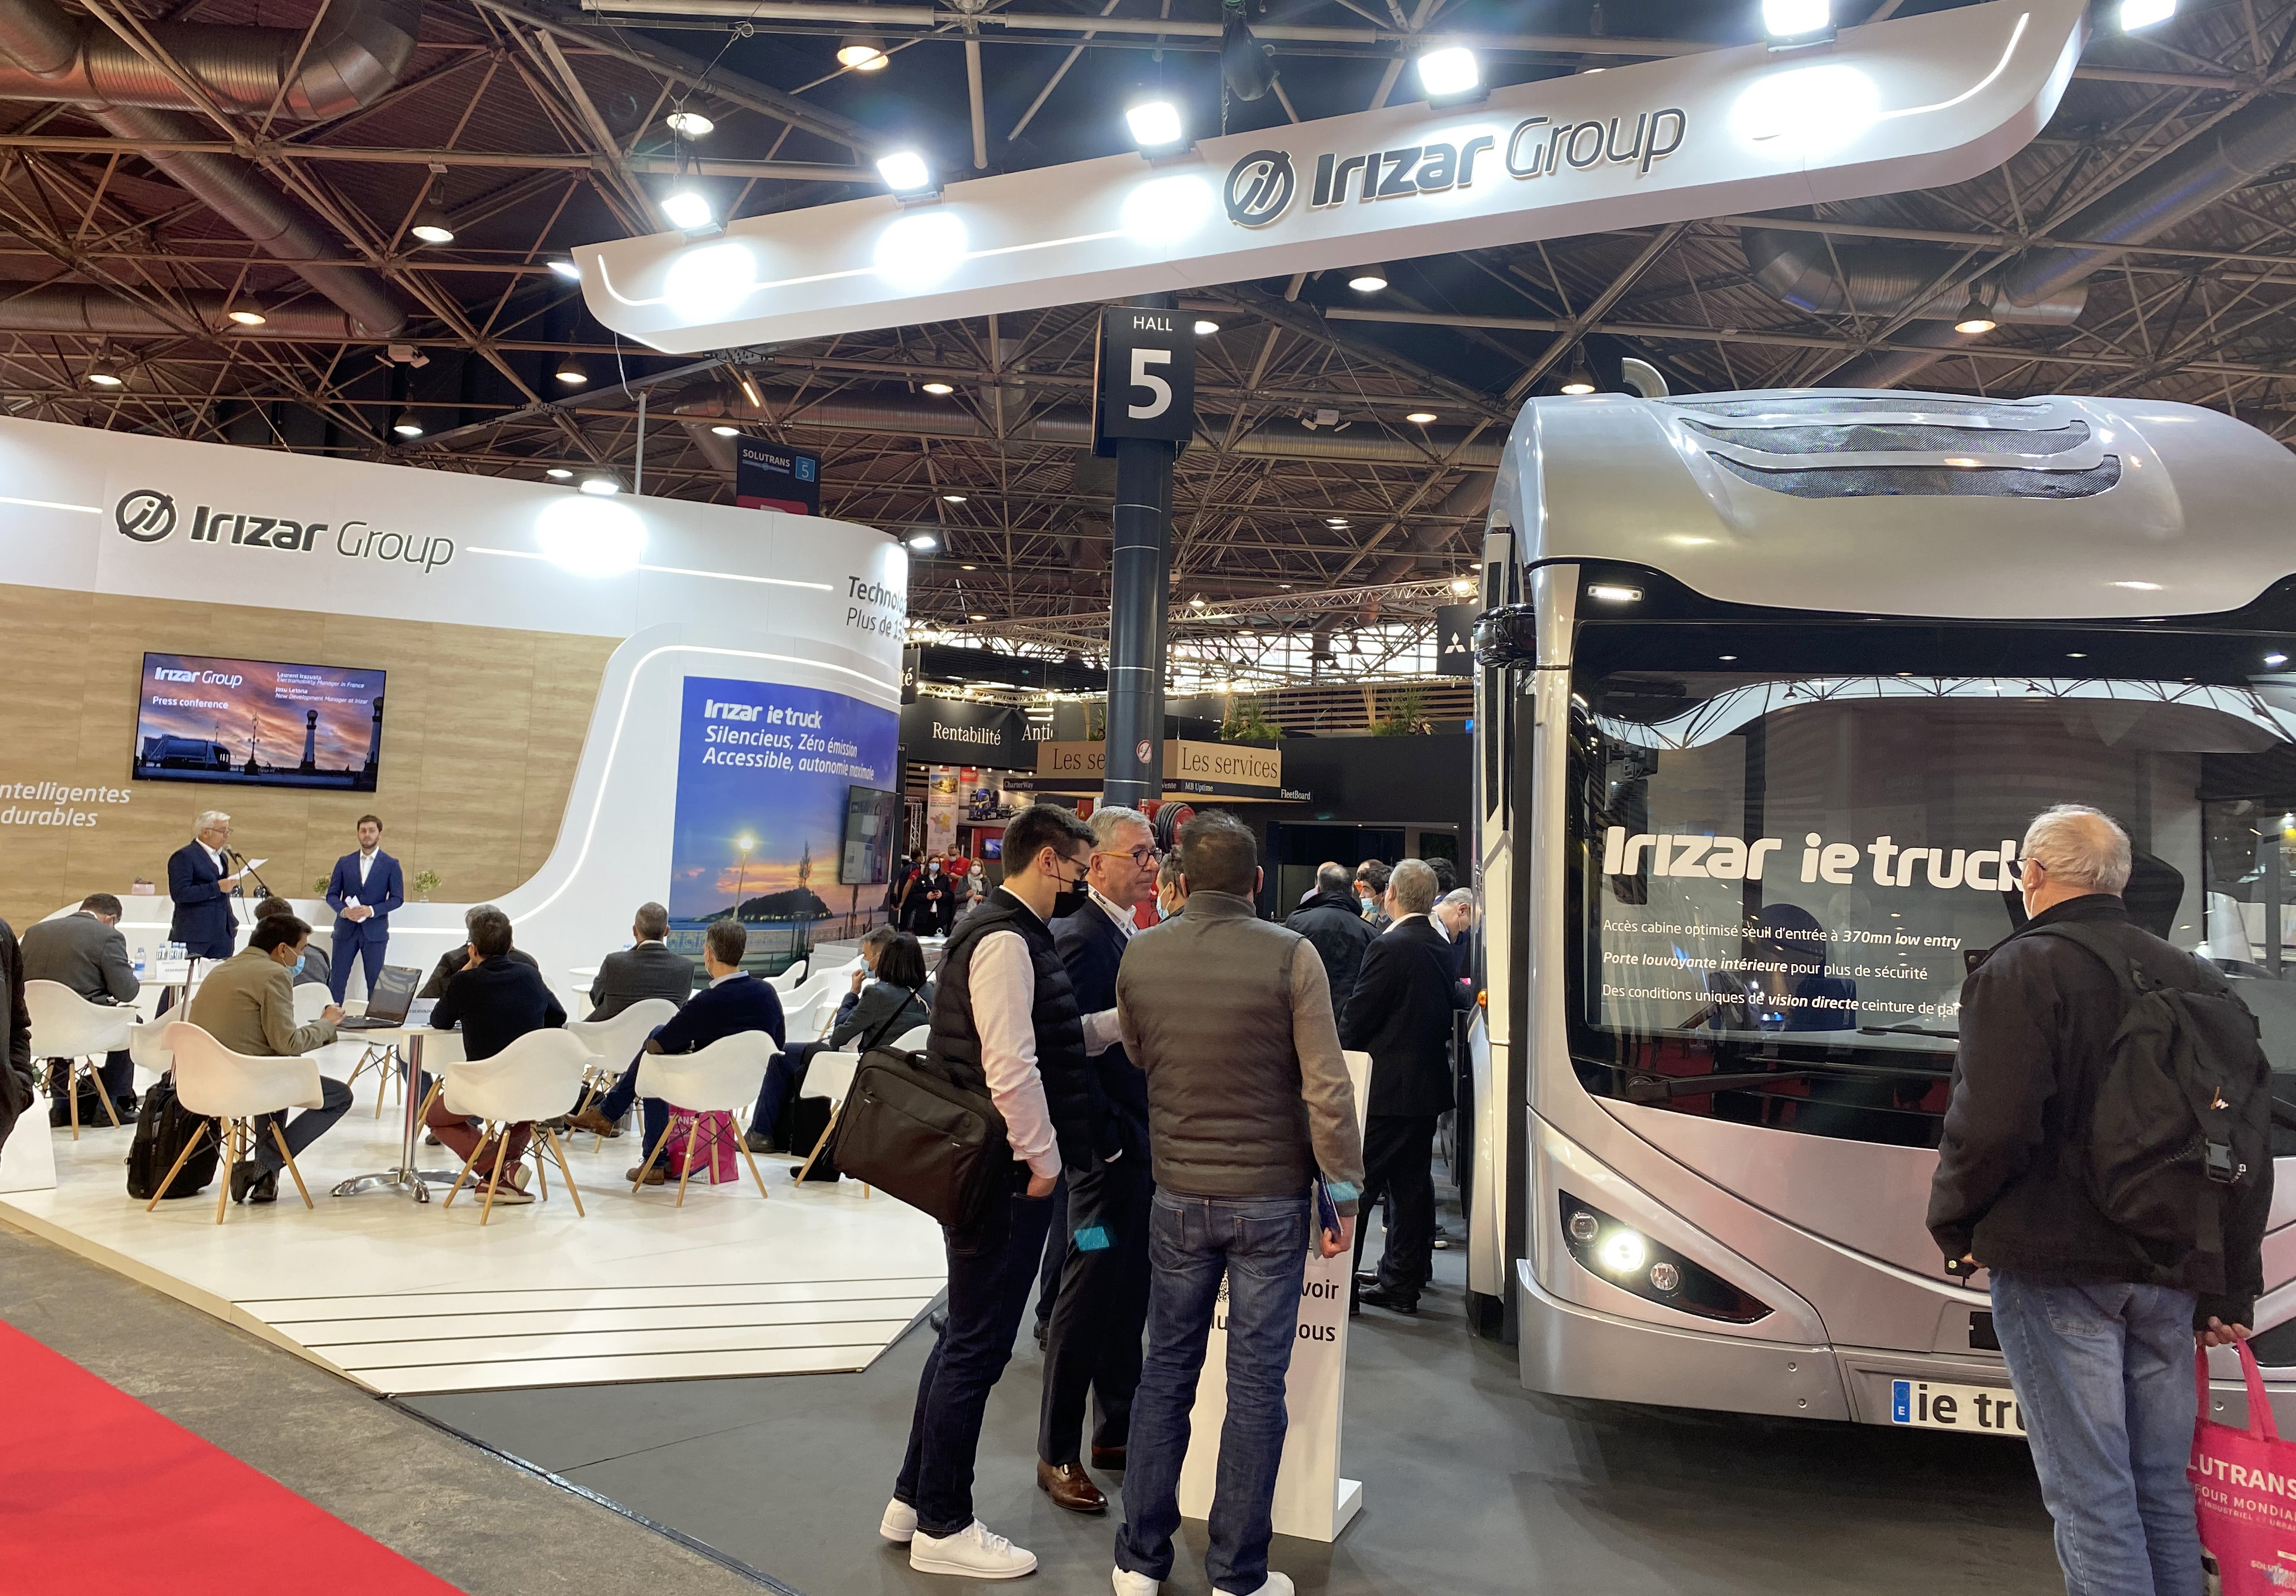 The Irizar Group will present the innovative electric Irizar ie truck at the Solutrans international trade fair in Lyon EuroExpo from 16 to 20 November.  The Irizar ie truck is a sustainable zero-emission truck, designed by the Irizar Group in response to